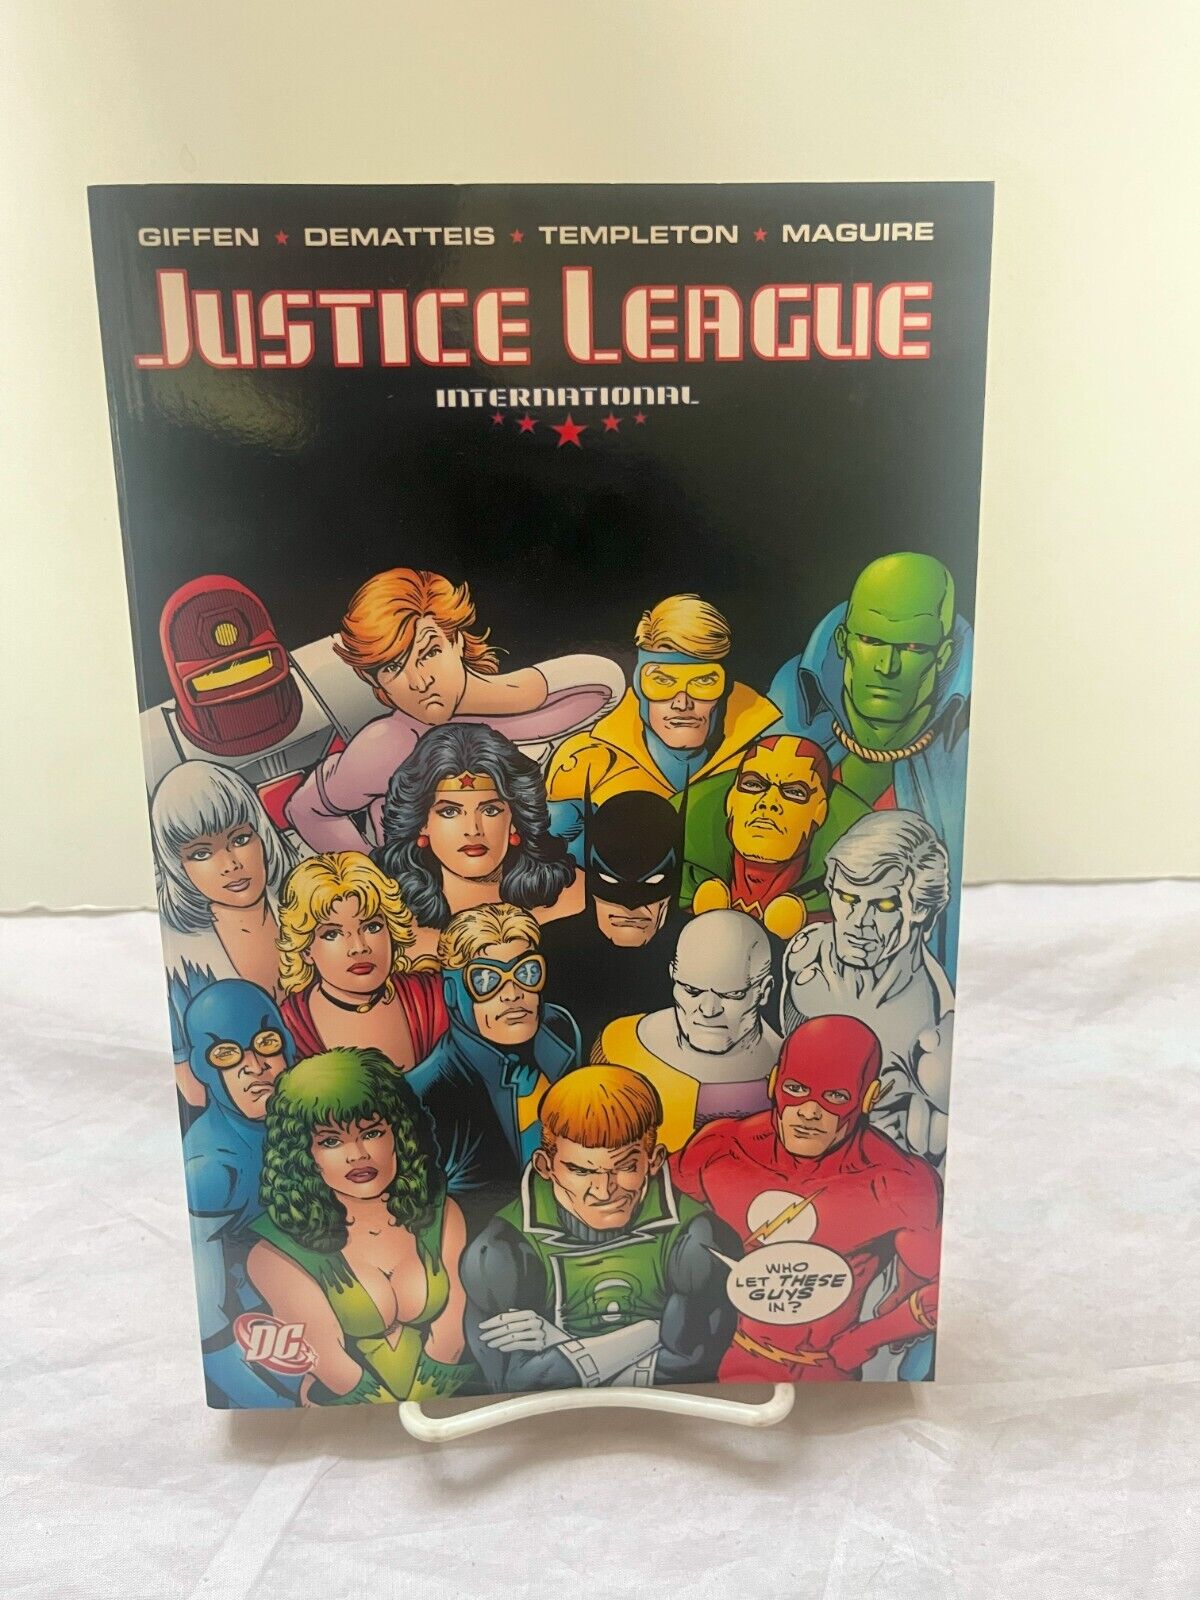 Justice League International Vol. 4 by Keith Giffen Paperback